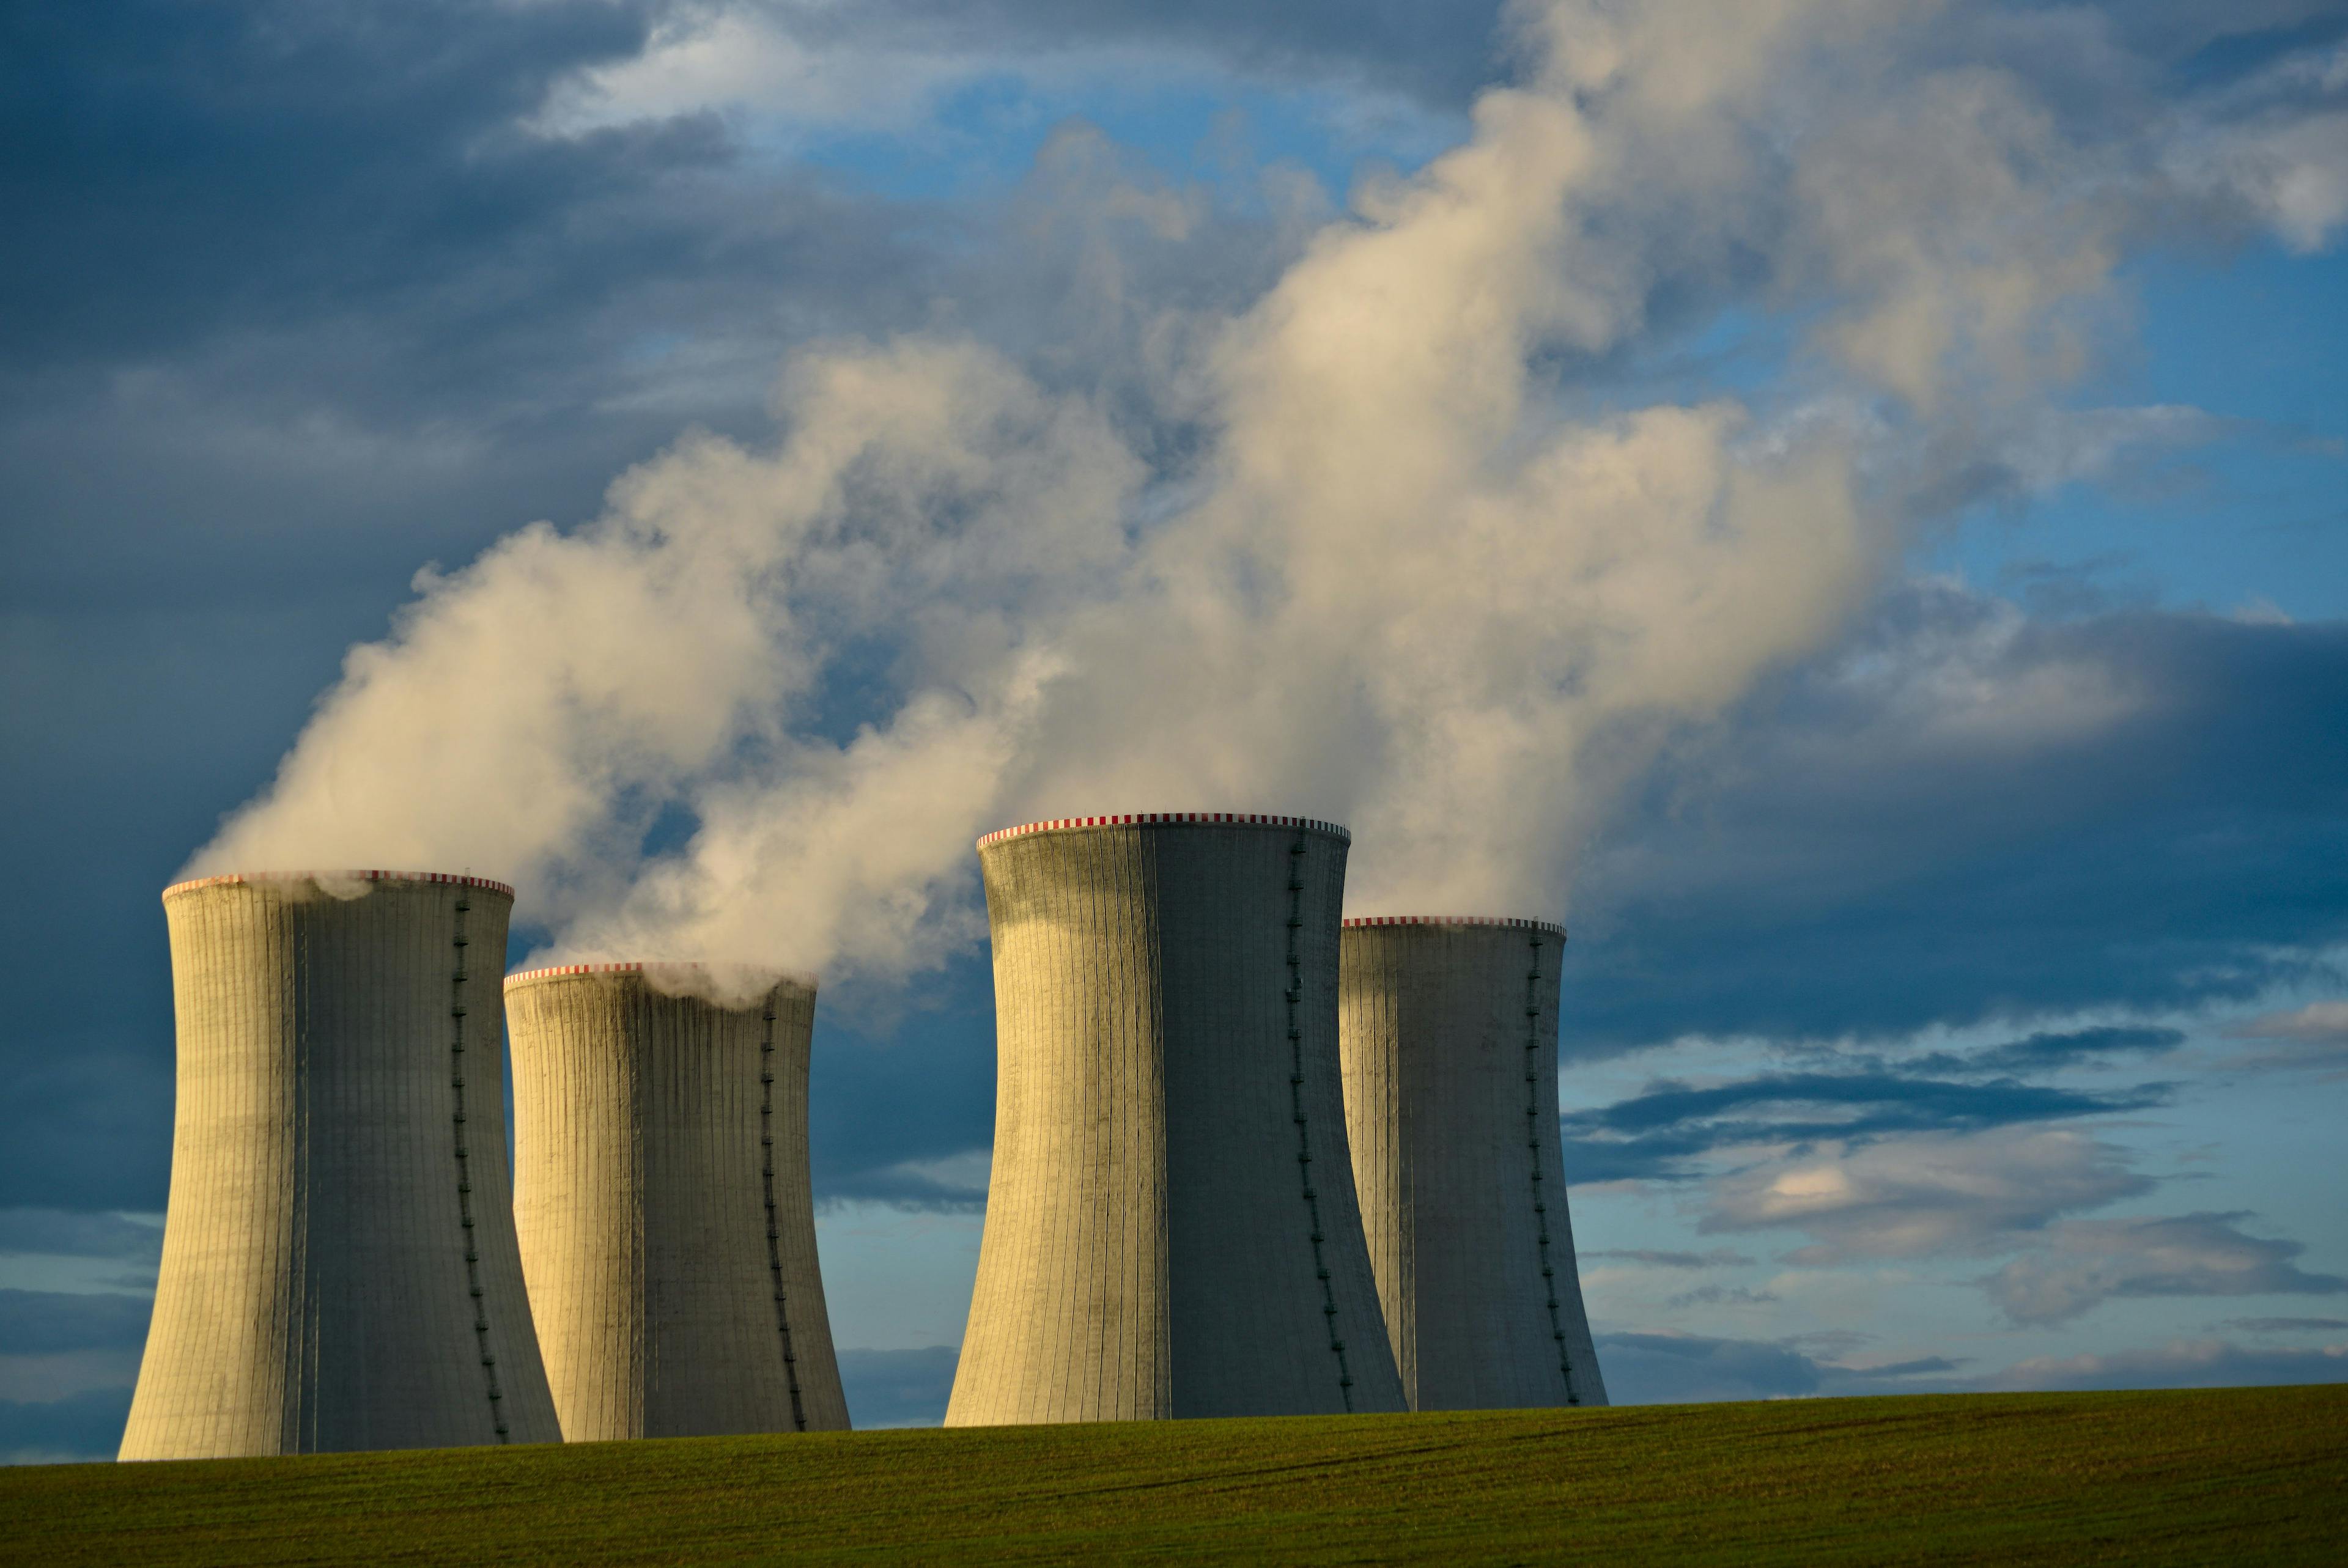 Two new reactors in Cattenom, what are the risks?